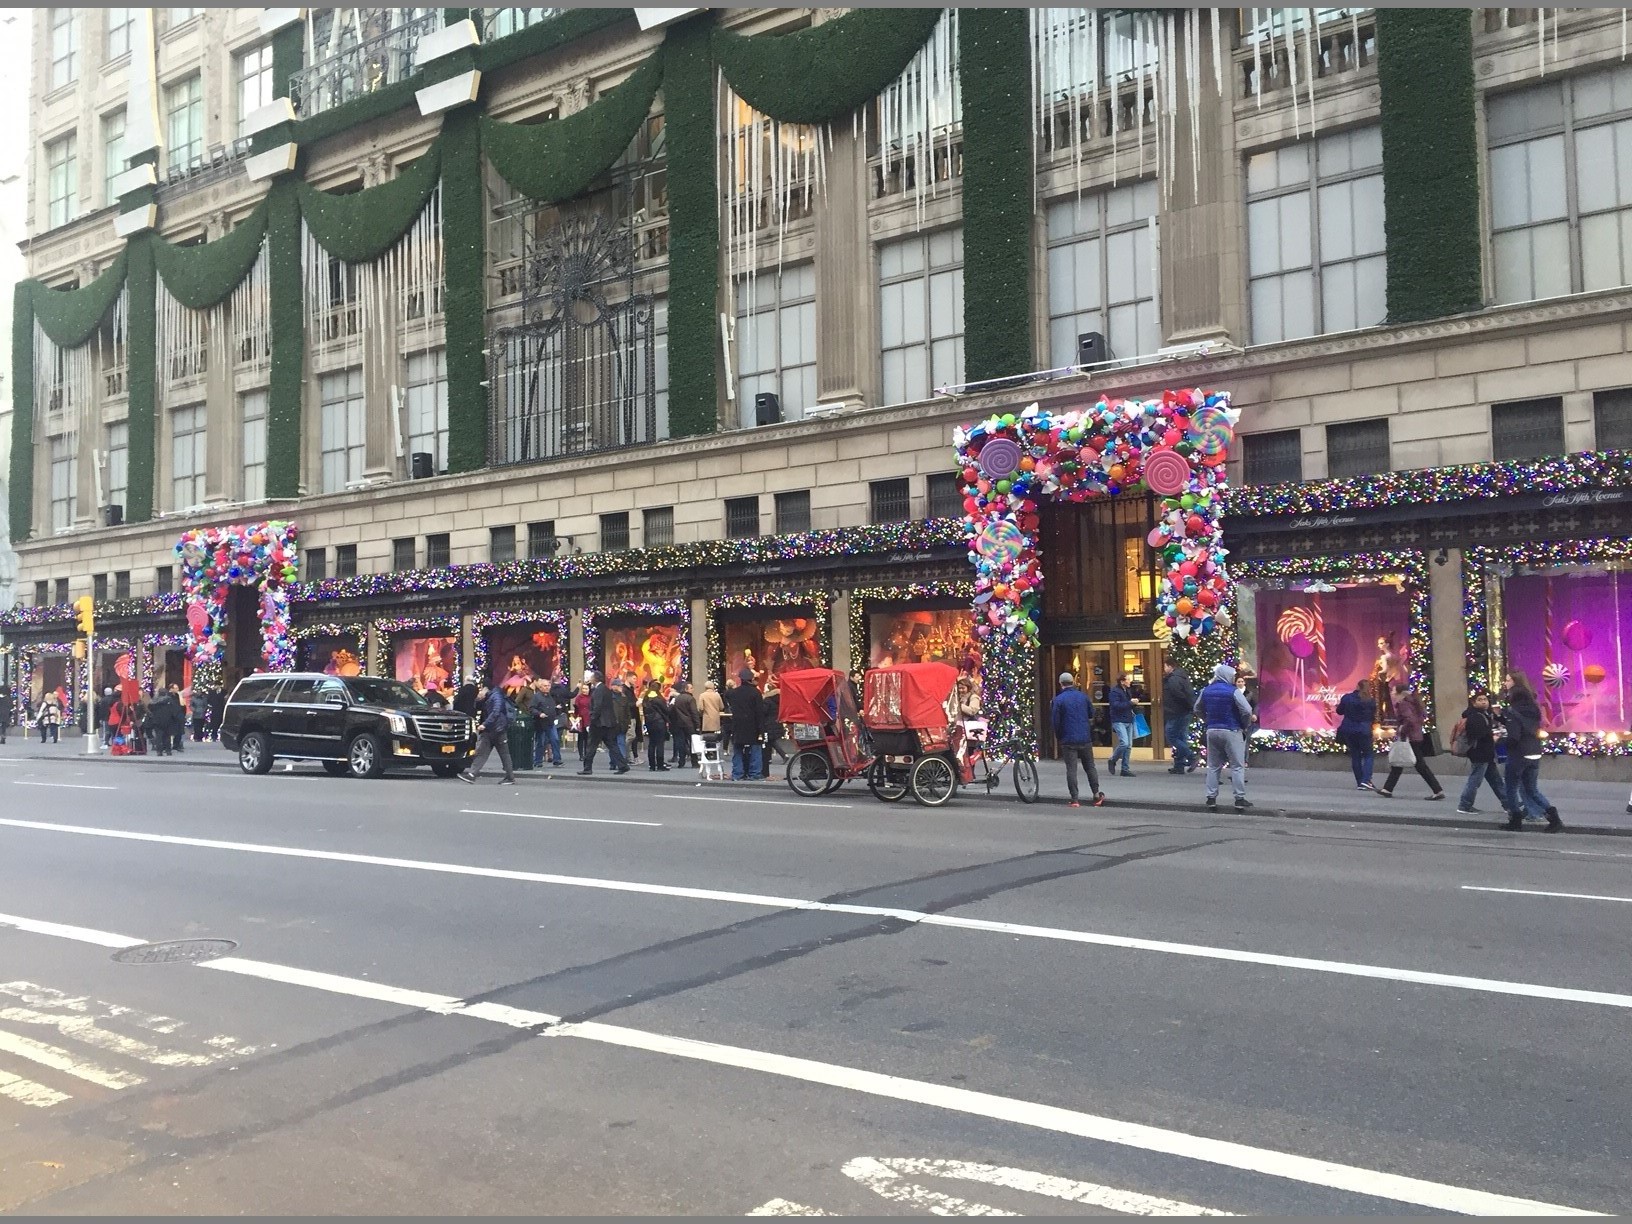 Louis Vuitton holiday window at Fifth Avenue and 57th Street, NYC